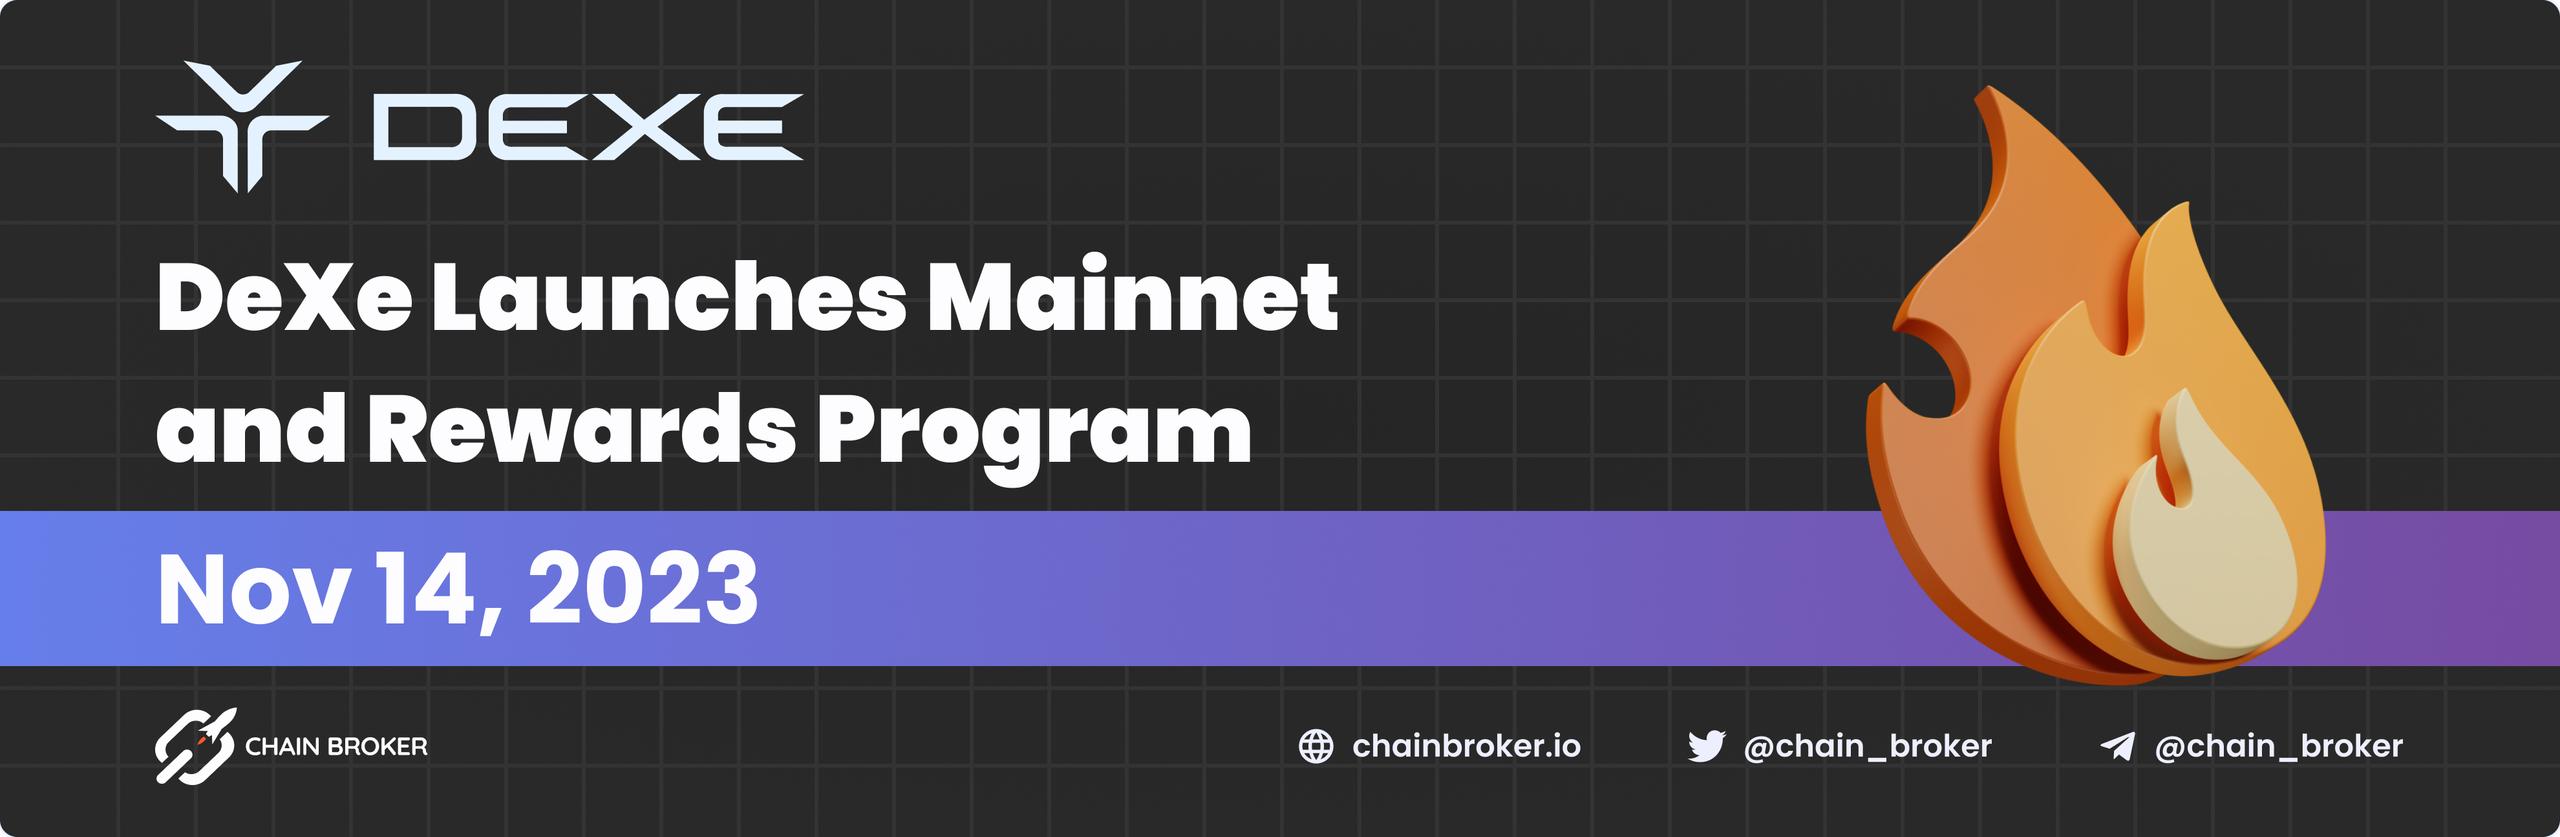 DeXe Protocol launches Mainnet and Rewards Program